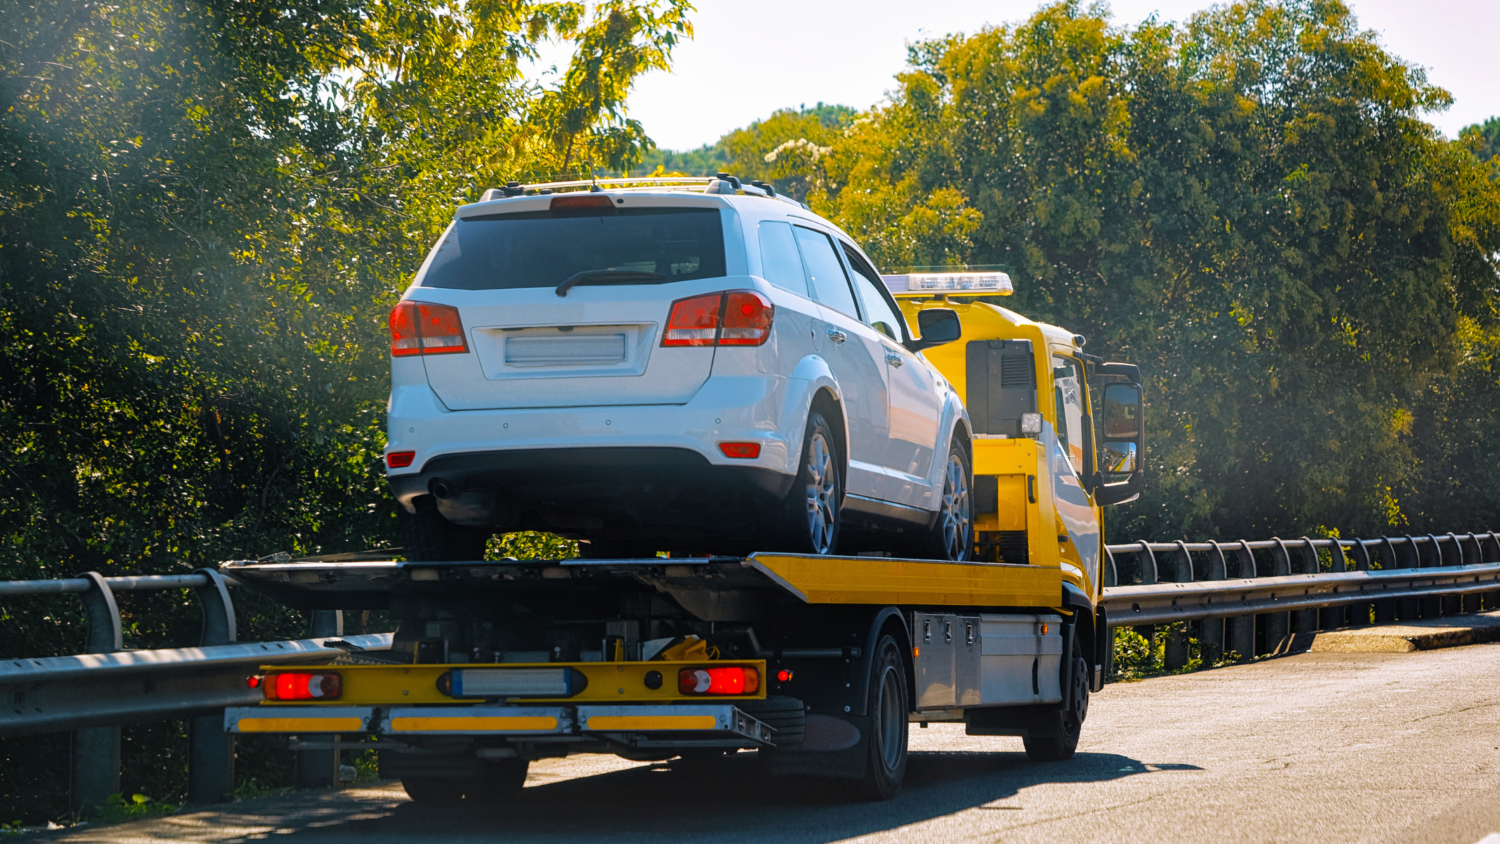 What Kind of Insurance Do You Need for a Tow Truck? - Minute Man Wheel Lifts